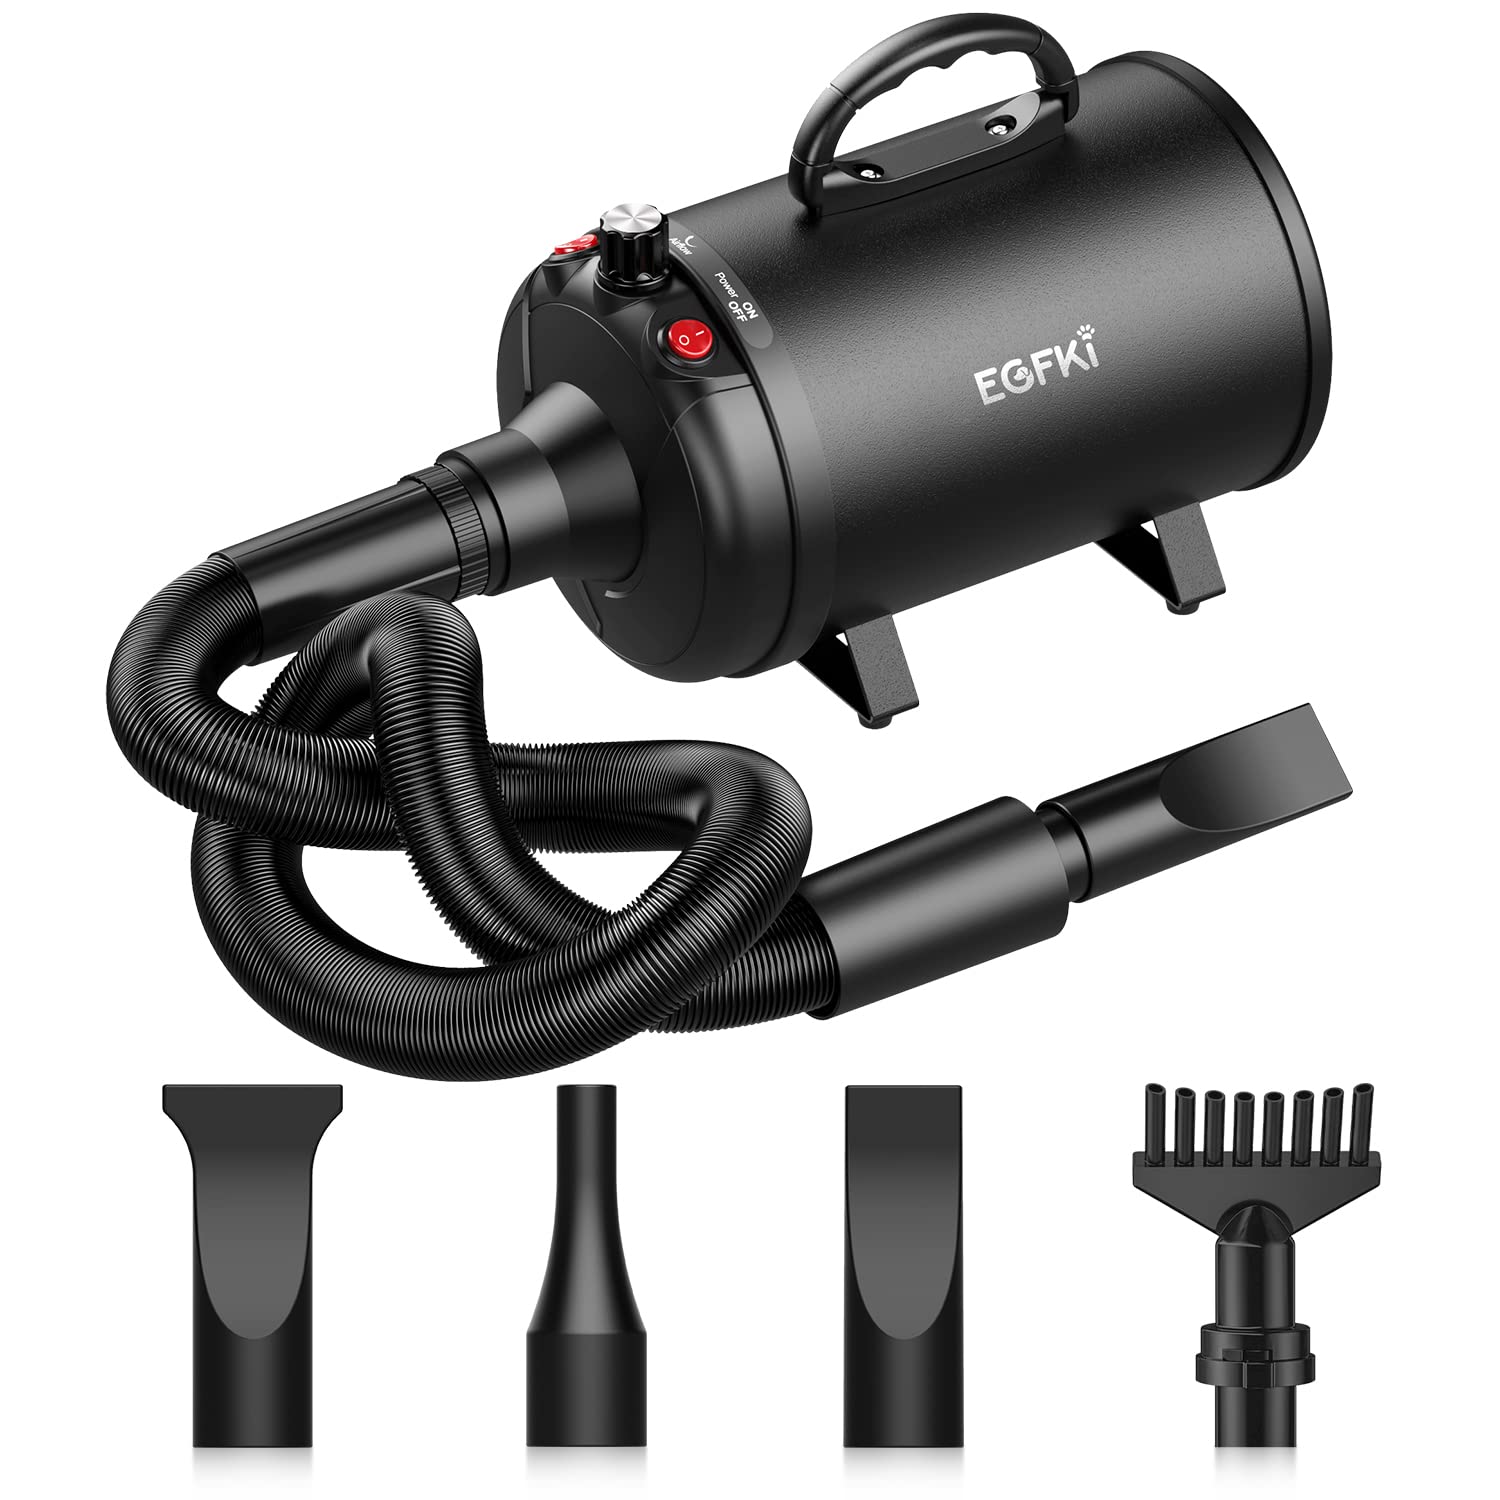 EGFKI Dog-Hair-Dryer, 5.2HP/ 3800W High Velocity Pet Blow Dryer with Heater for Grooming, Speed Temperature Adjustable Dog Blowe